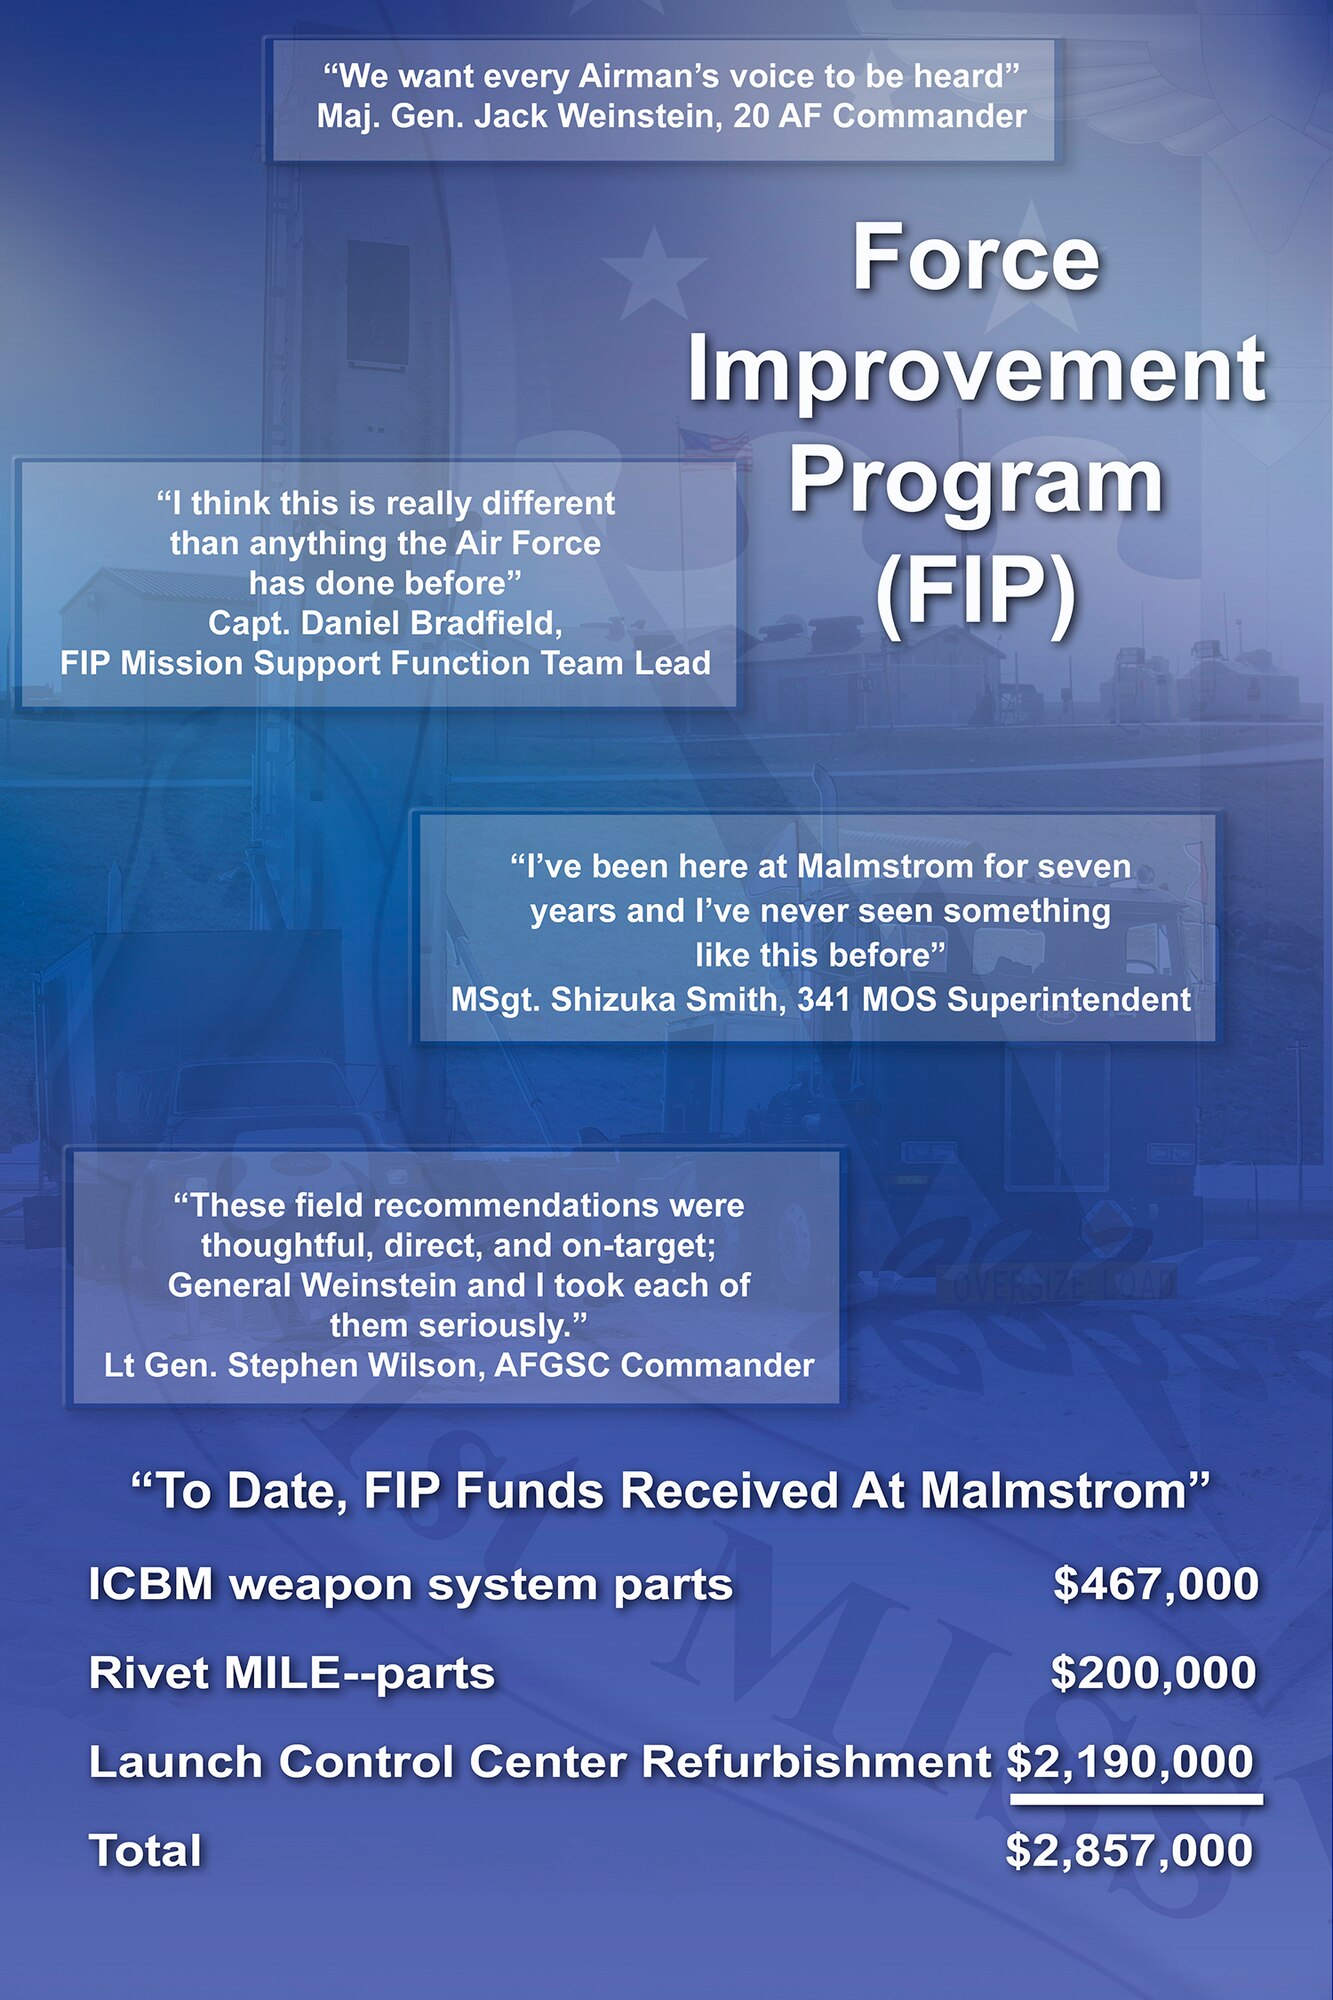 Force Improvement Program (FIP) funds received at Malmstrom Air Force Base to date. (Graphic courtesy of Malmstrom Air Force Base public affairs)